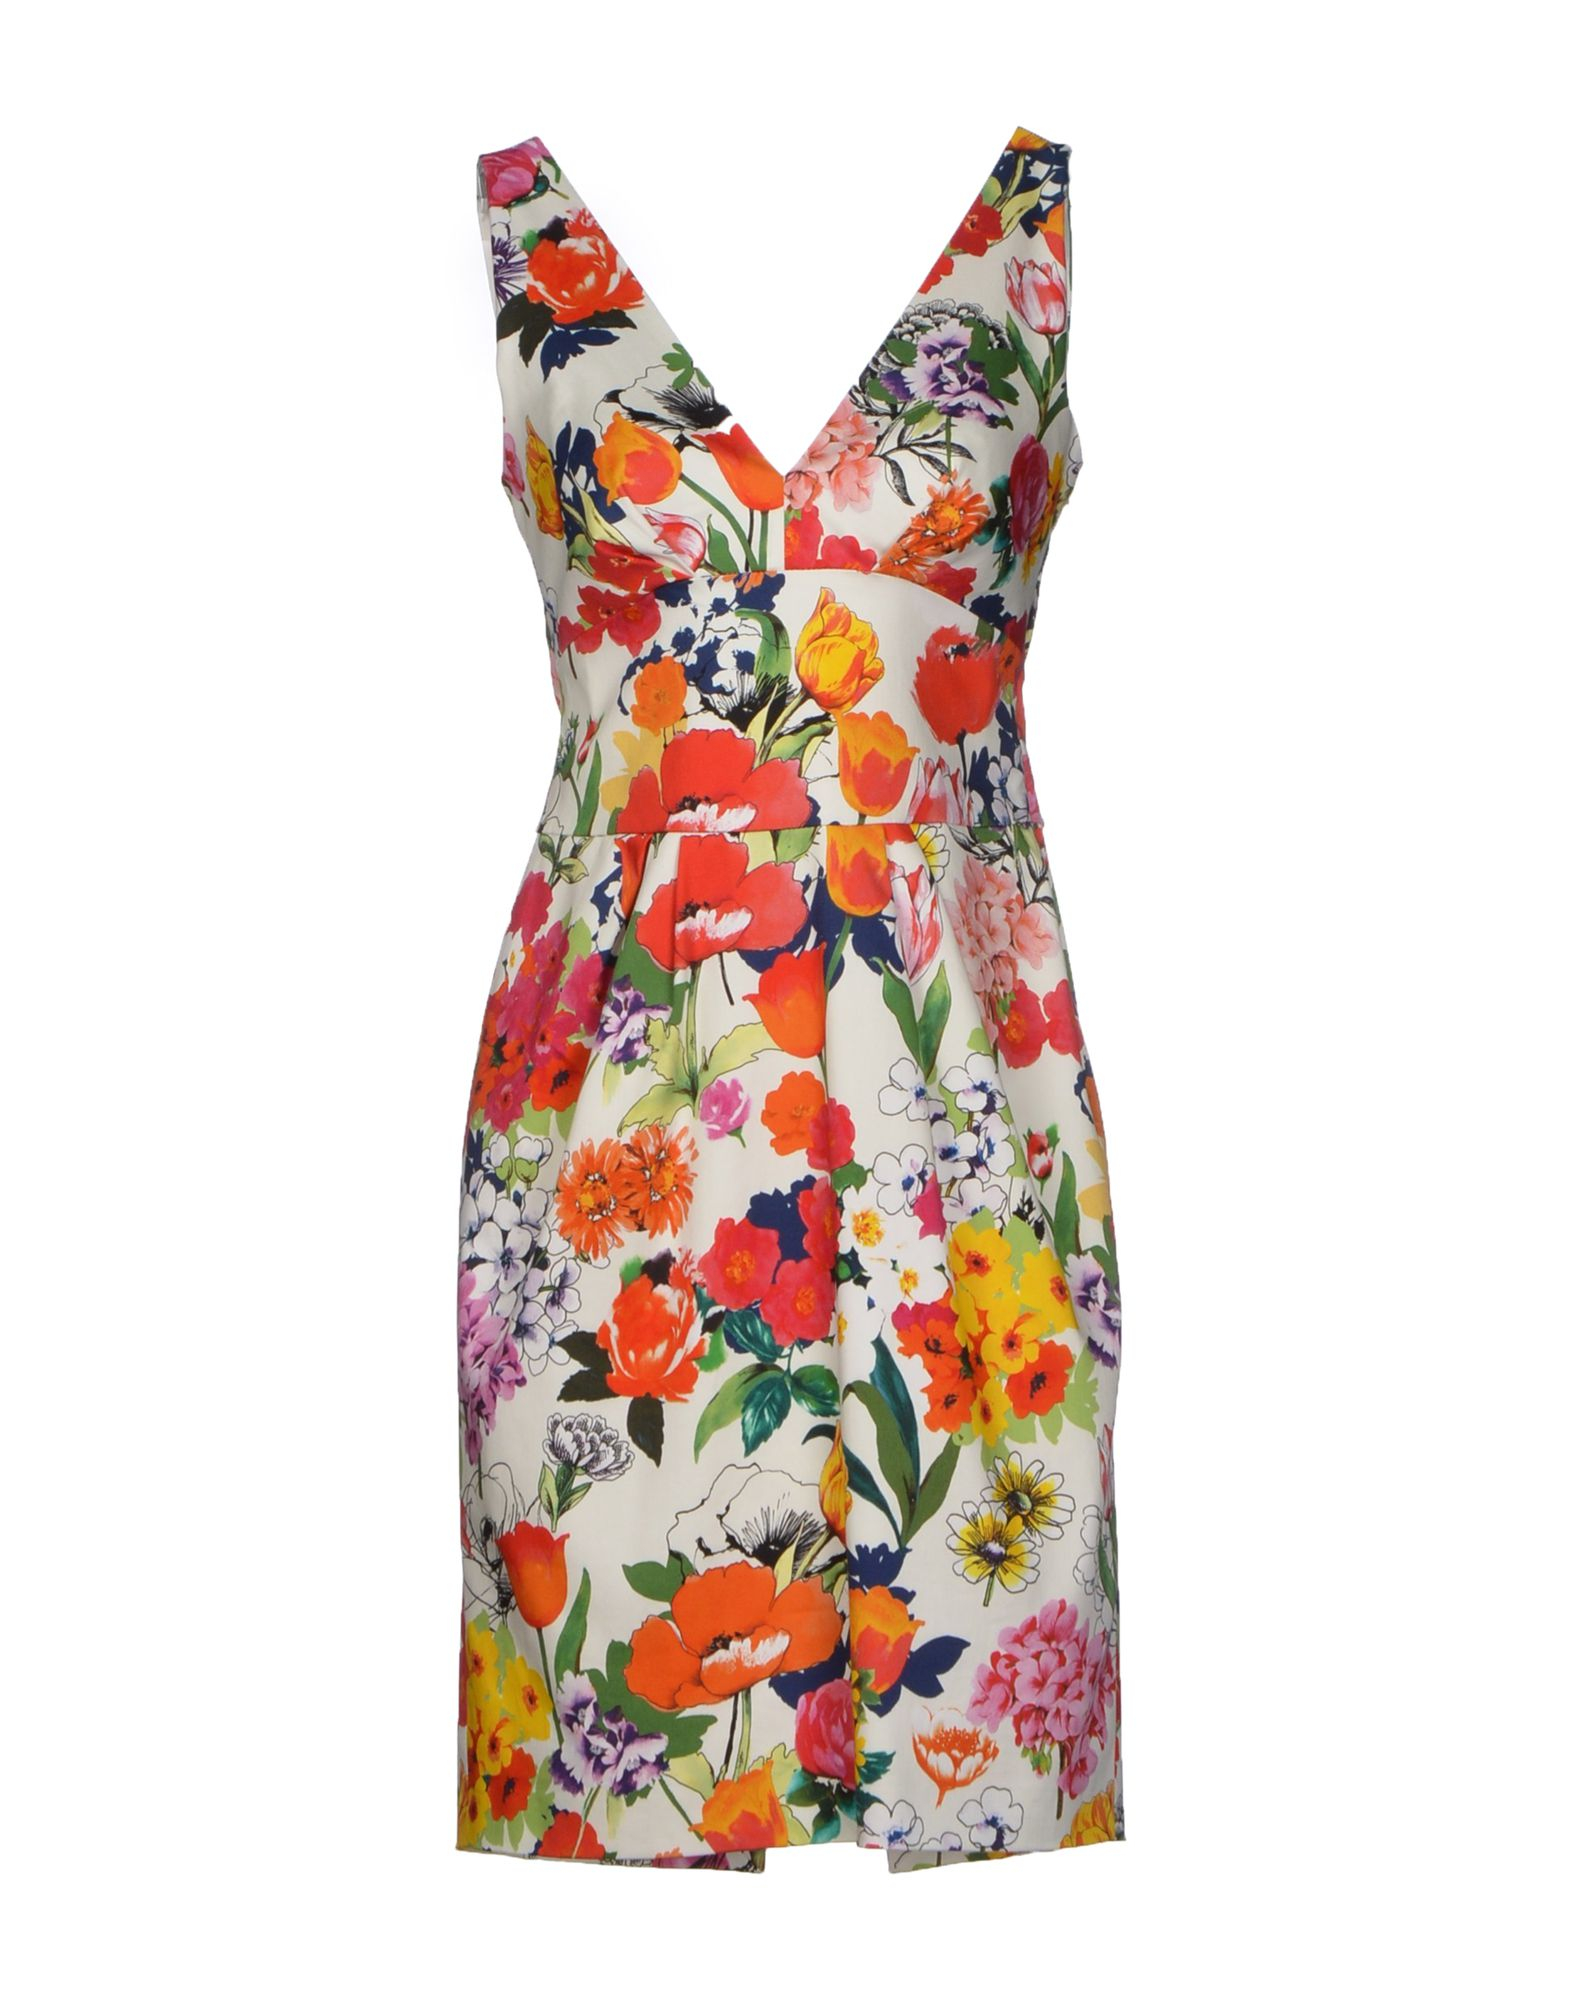 Lyst - Moschino Floral And Traffic Cone Dress in White